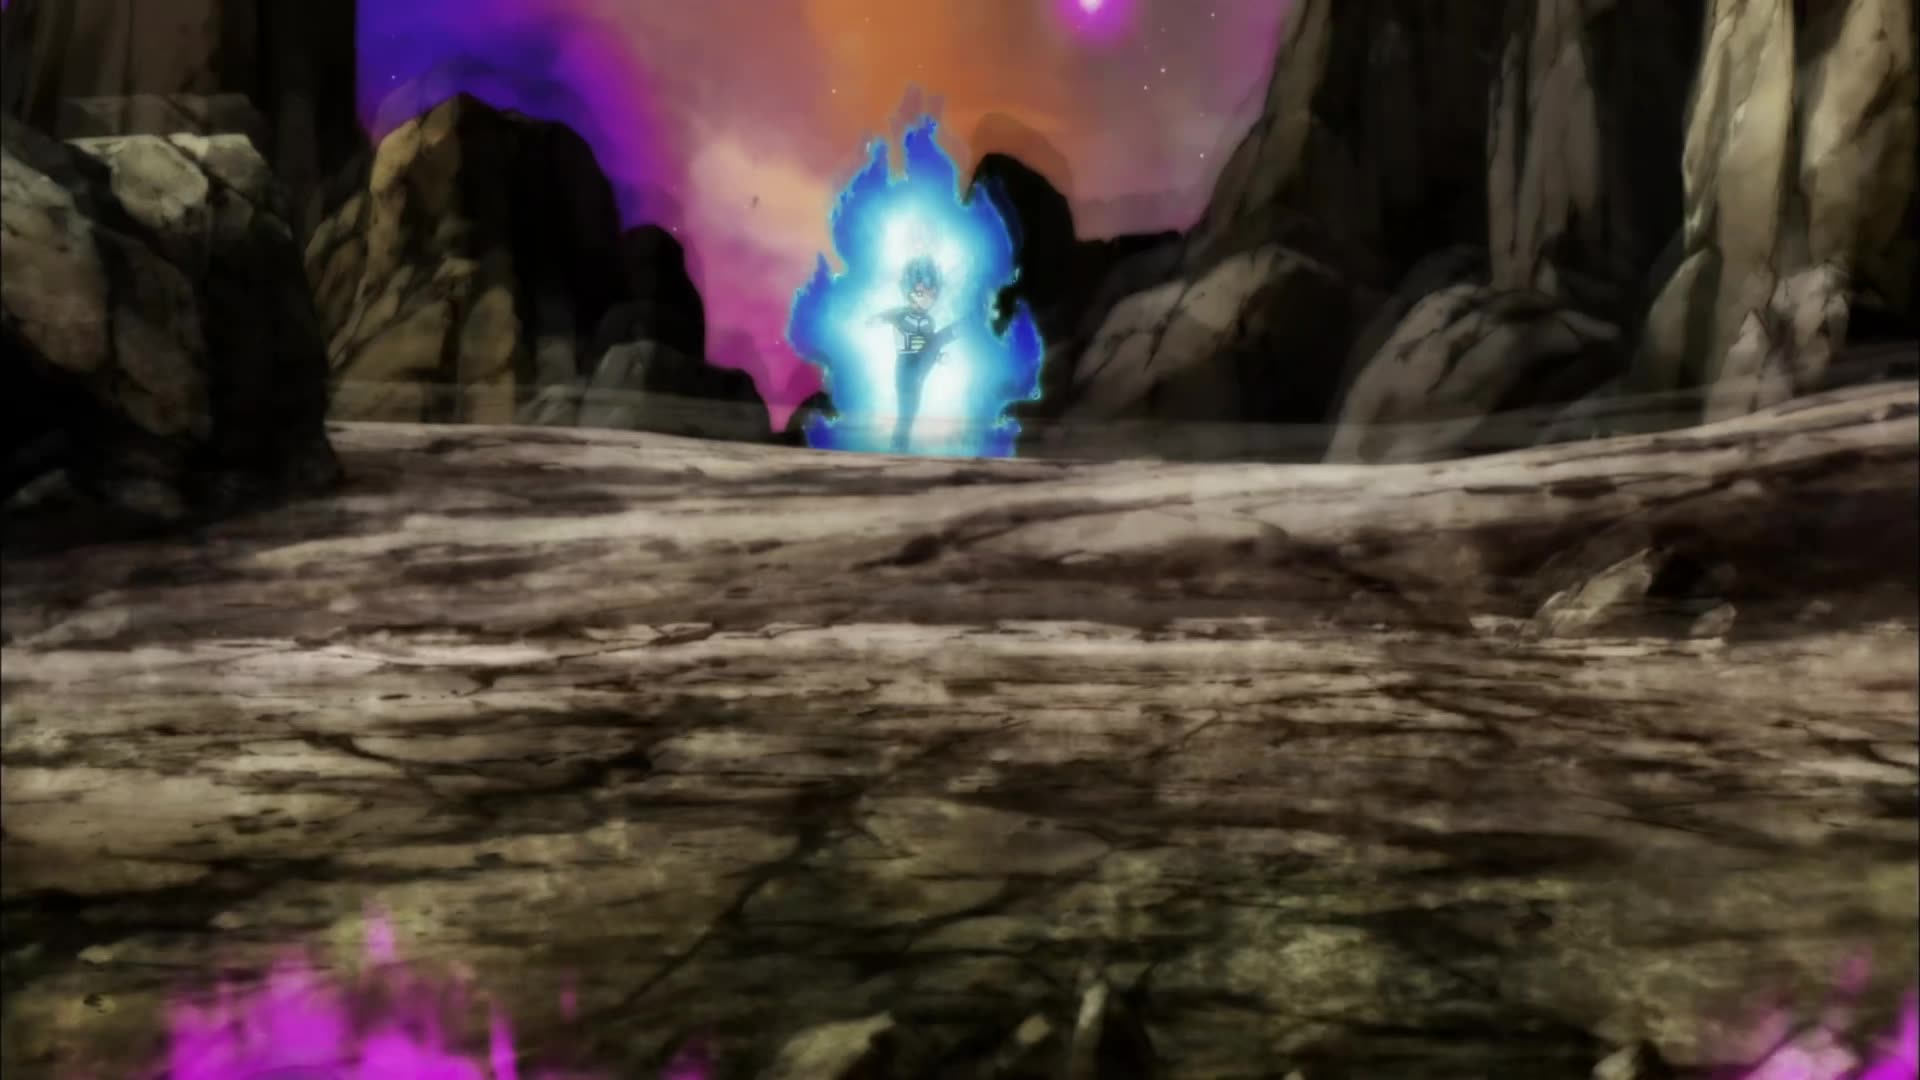 Universe 7 vs Top, the destroyer